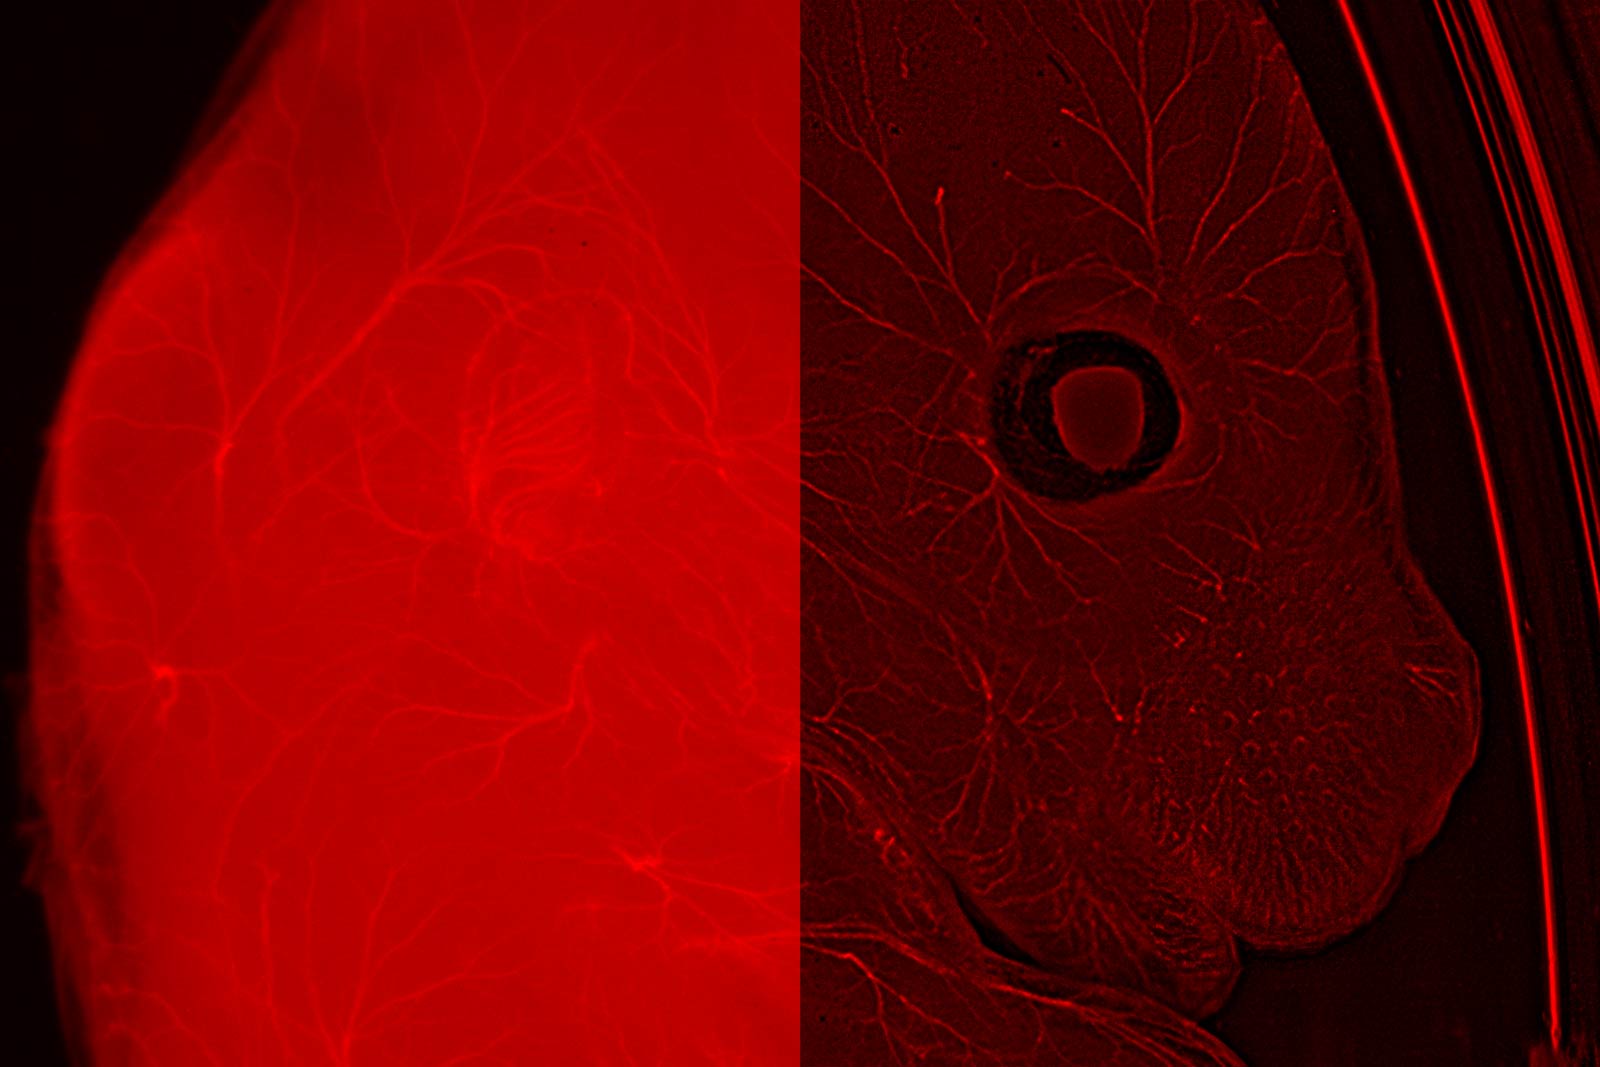 In this E12-13 muose (wt sample), neurafilaments are stained in red to assess neuronal outgrowth. The mouse was cleared with the ScaleS reagent. Sample courtesy Yves Lutz, Centre d'imagerie, IGBMC, France.